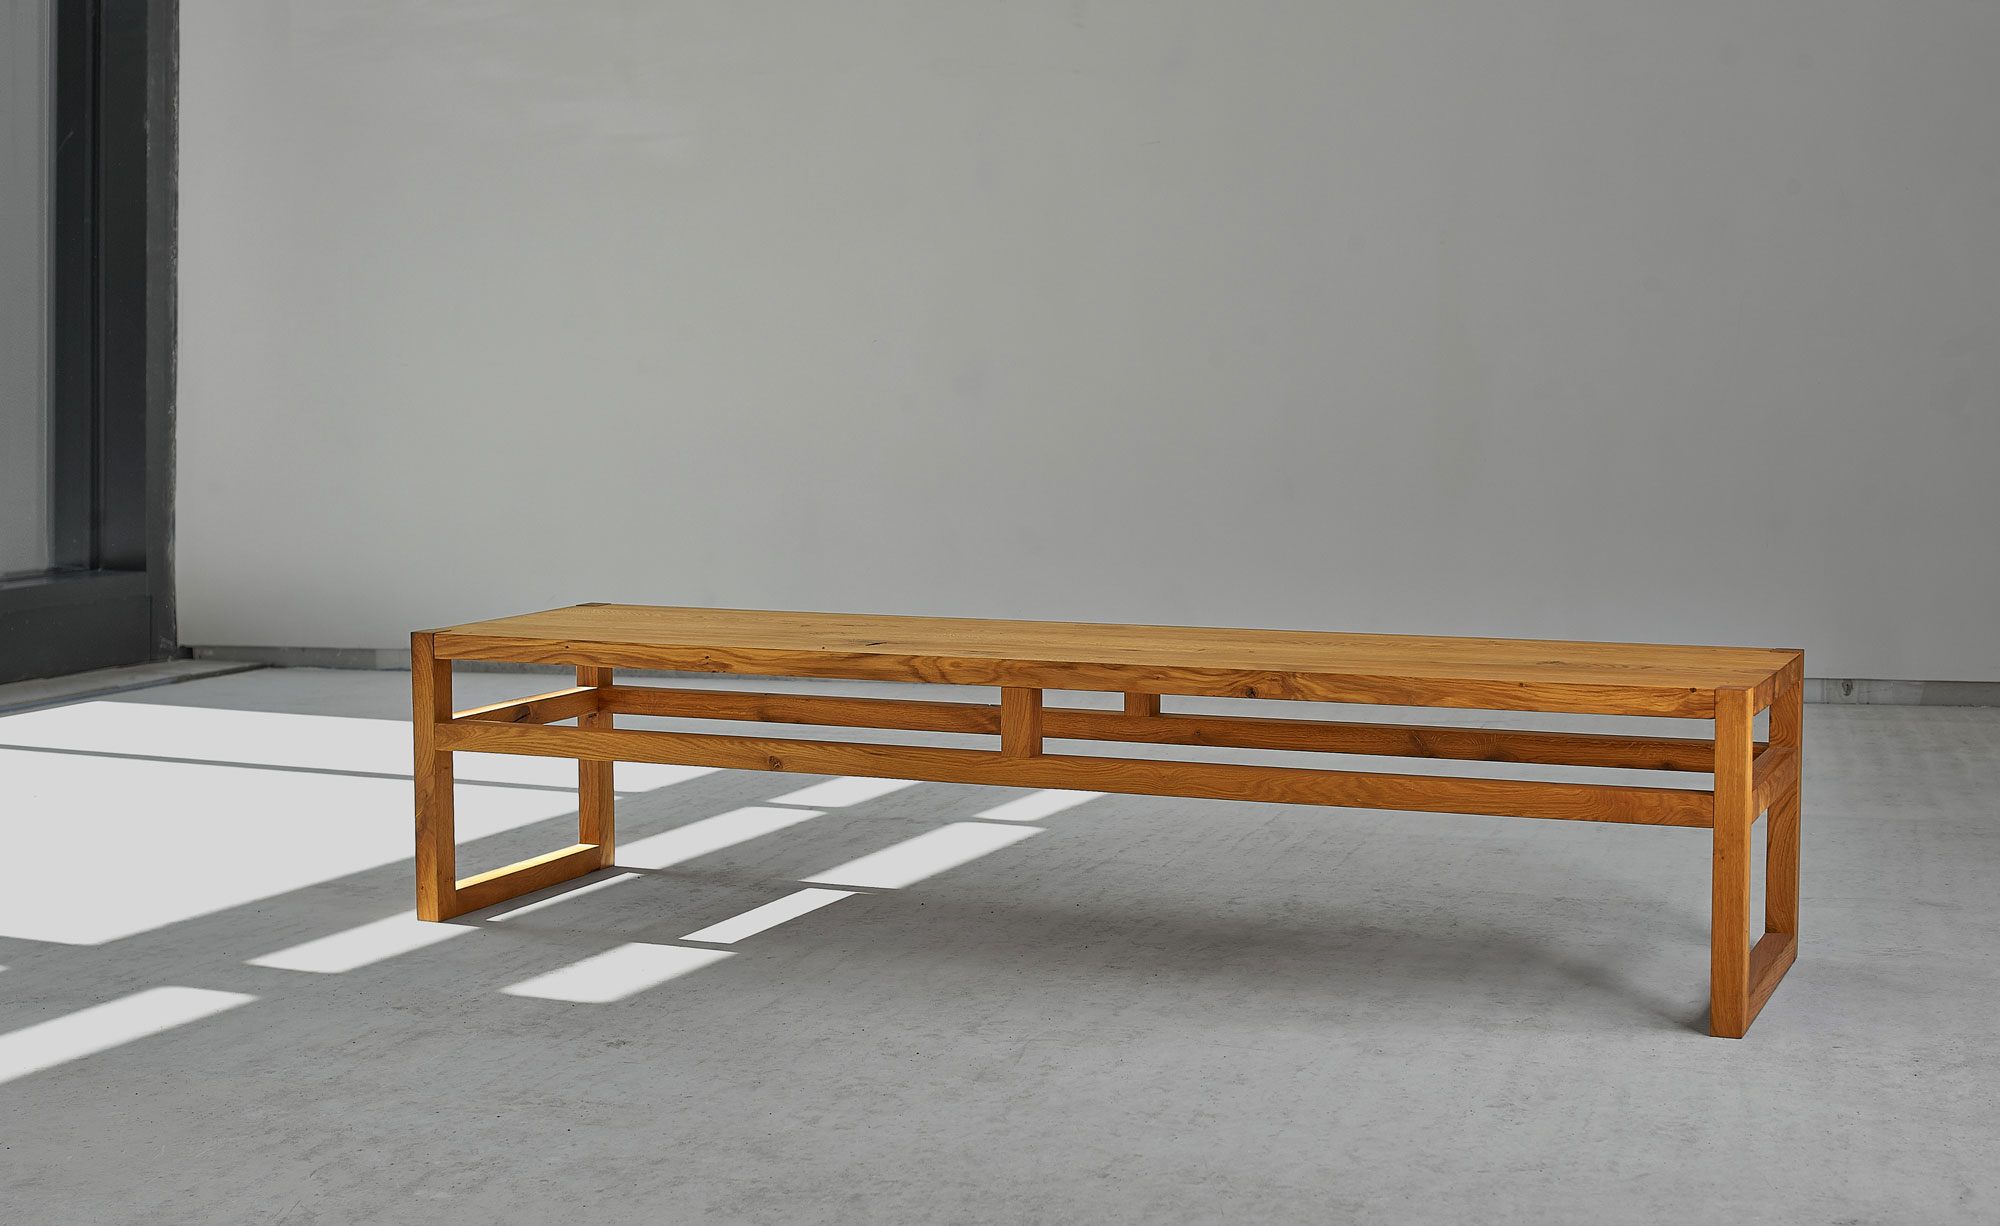 Dining Room Wood Bench SENA 00154 custom made in solid wood by vitamin design